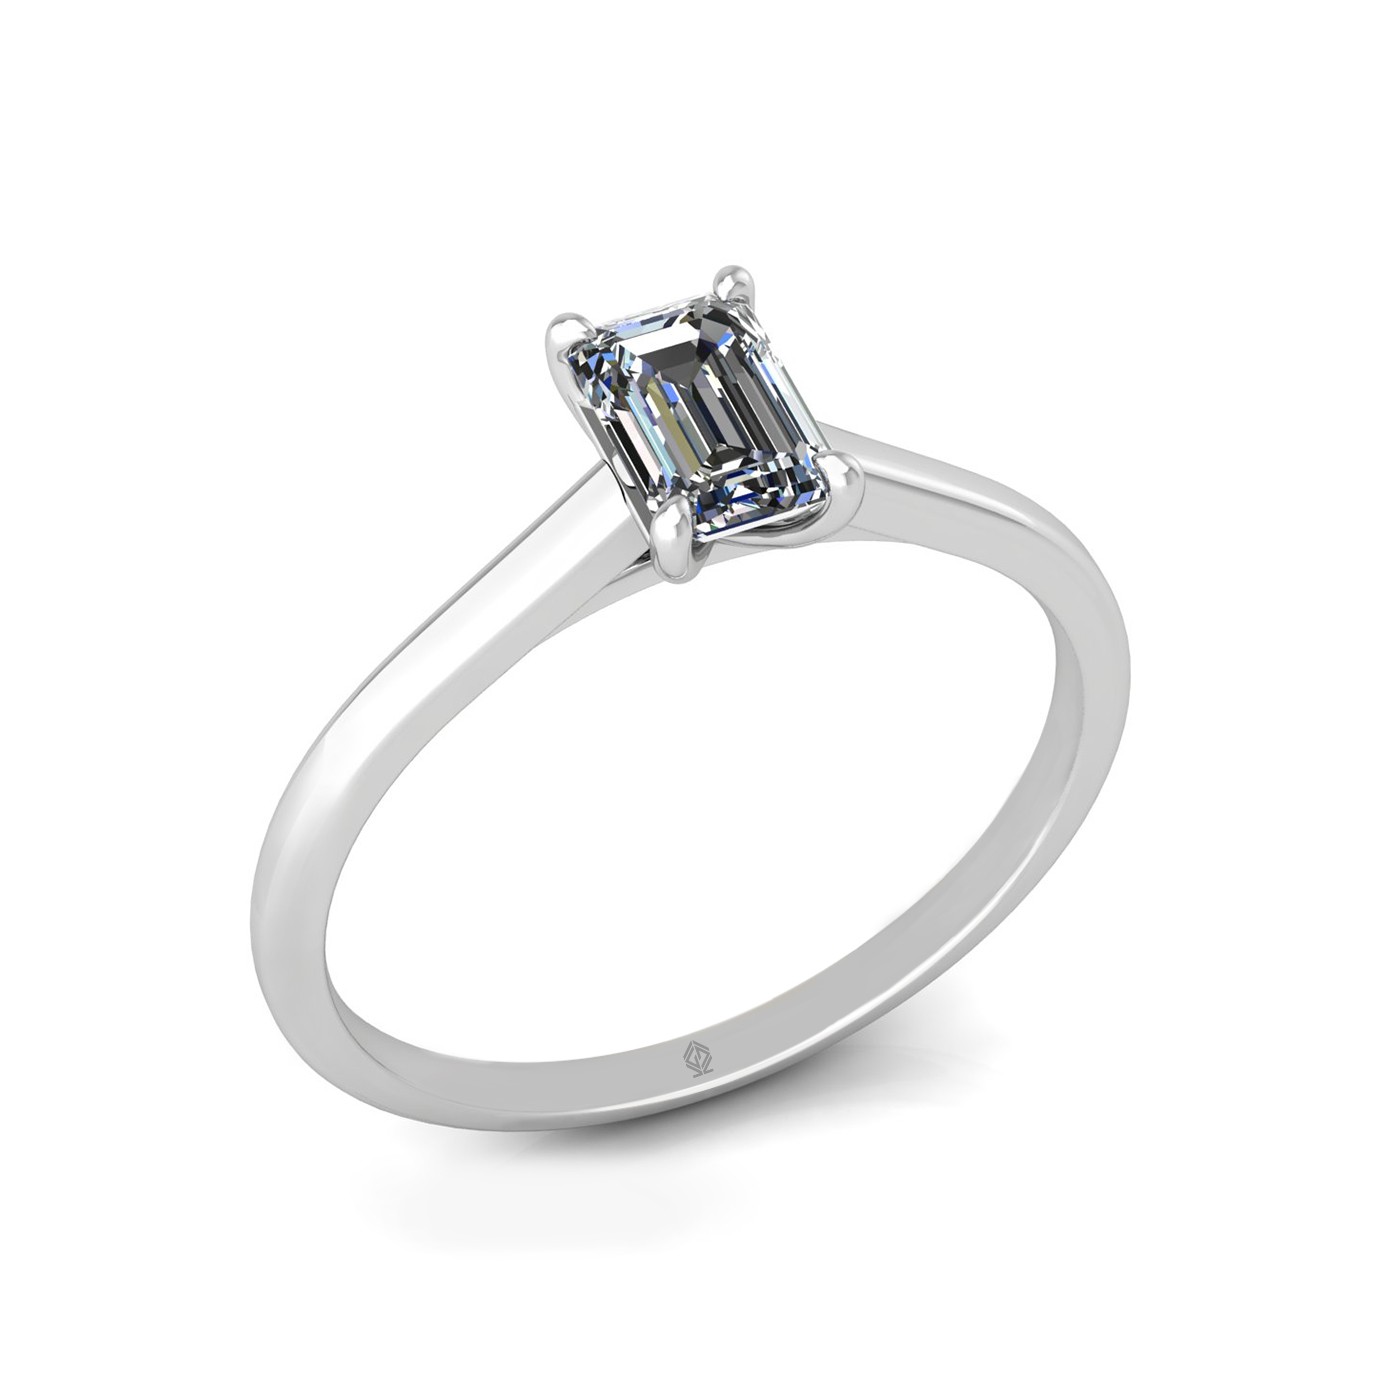 18k white gold  0,50 ct 4 prongs solitaire emerald cut diamond engagement ring with whisper thin band